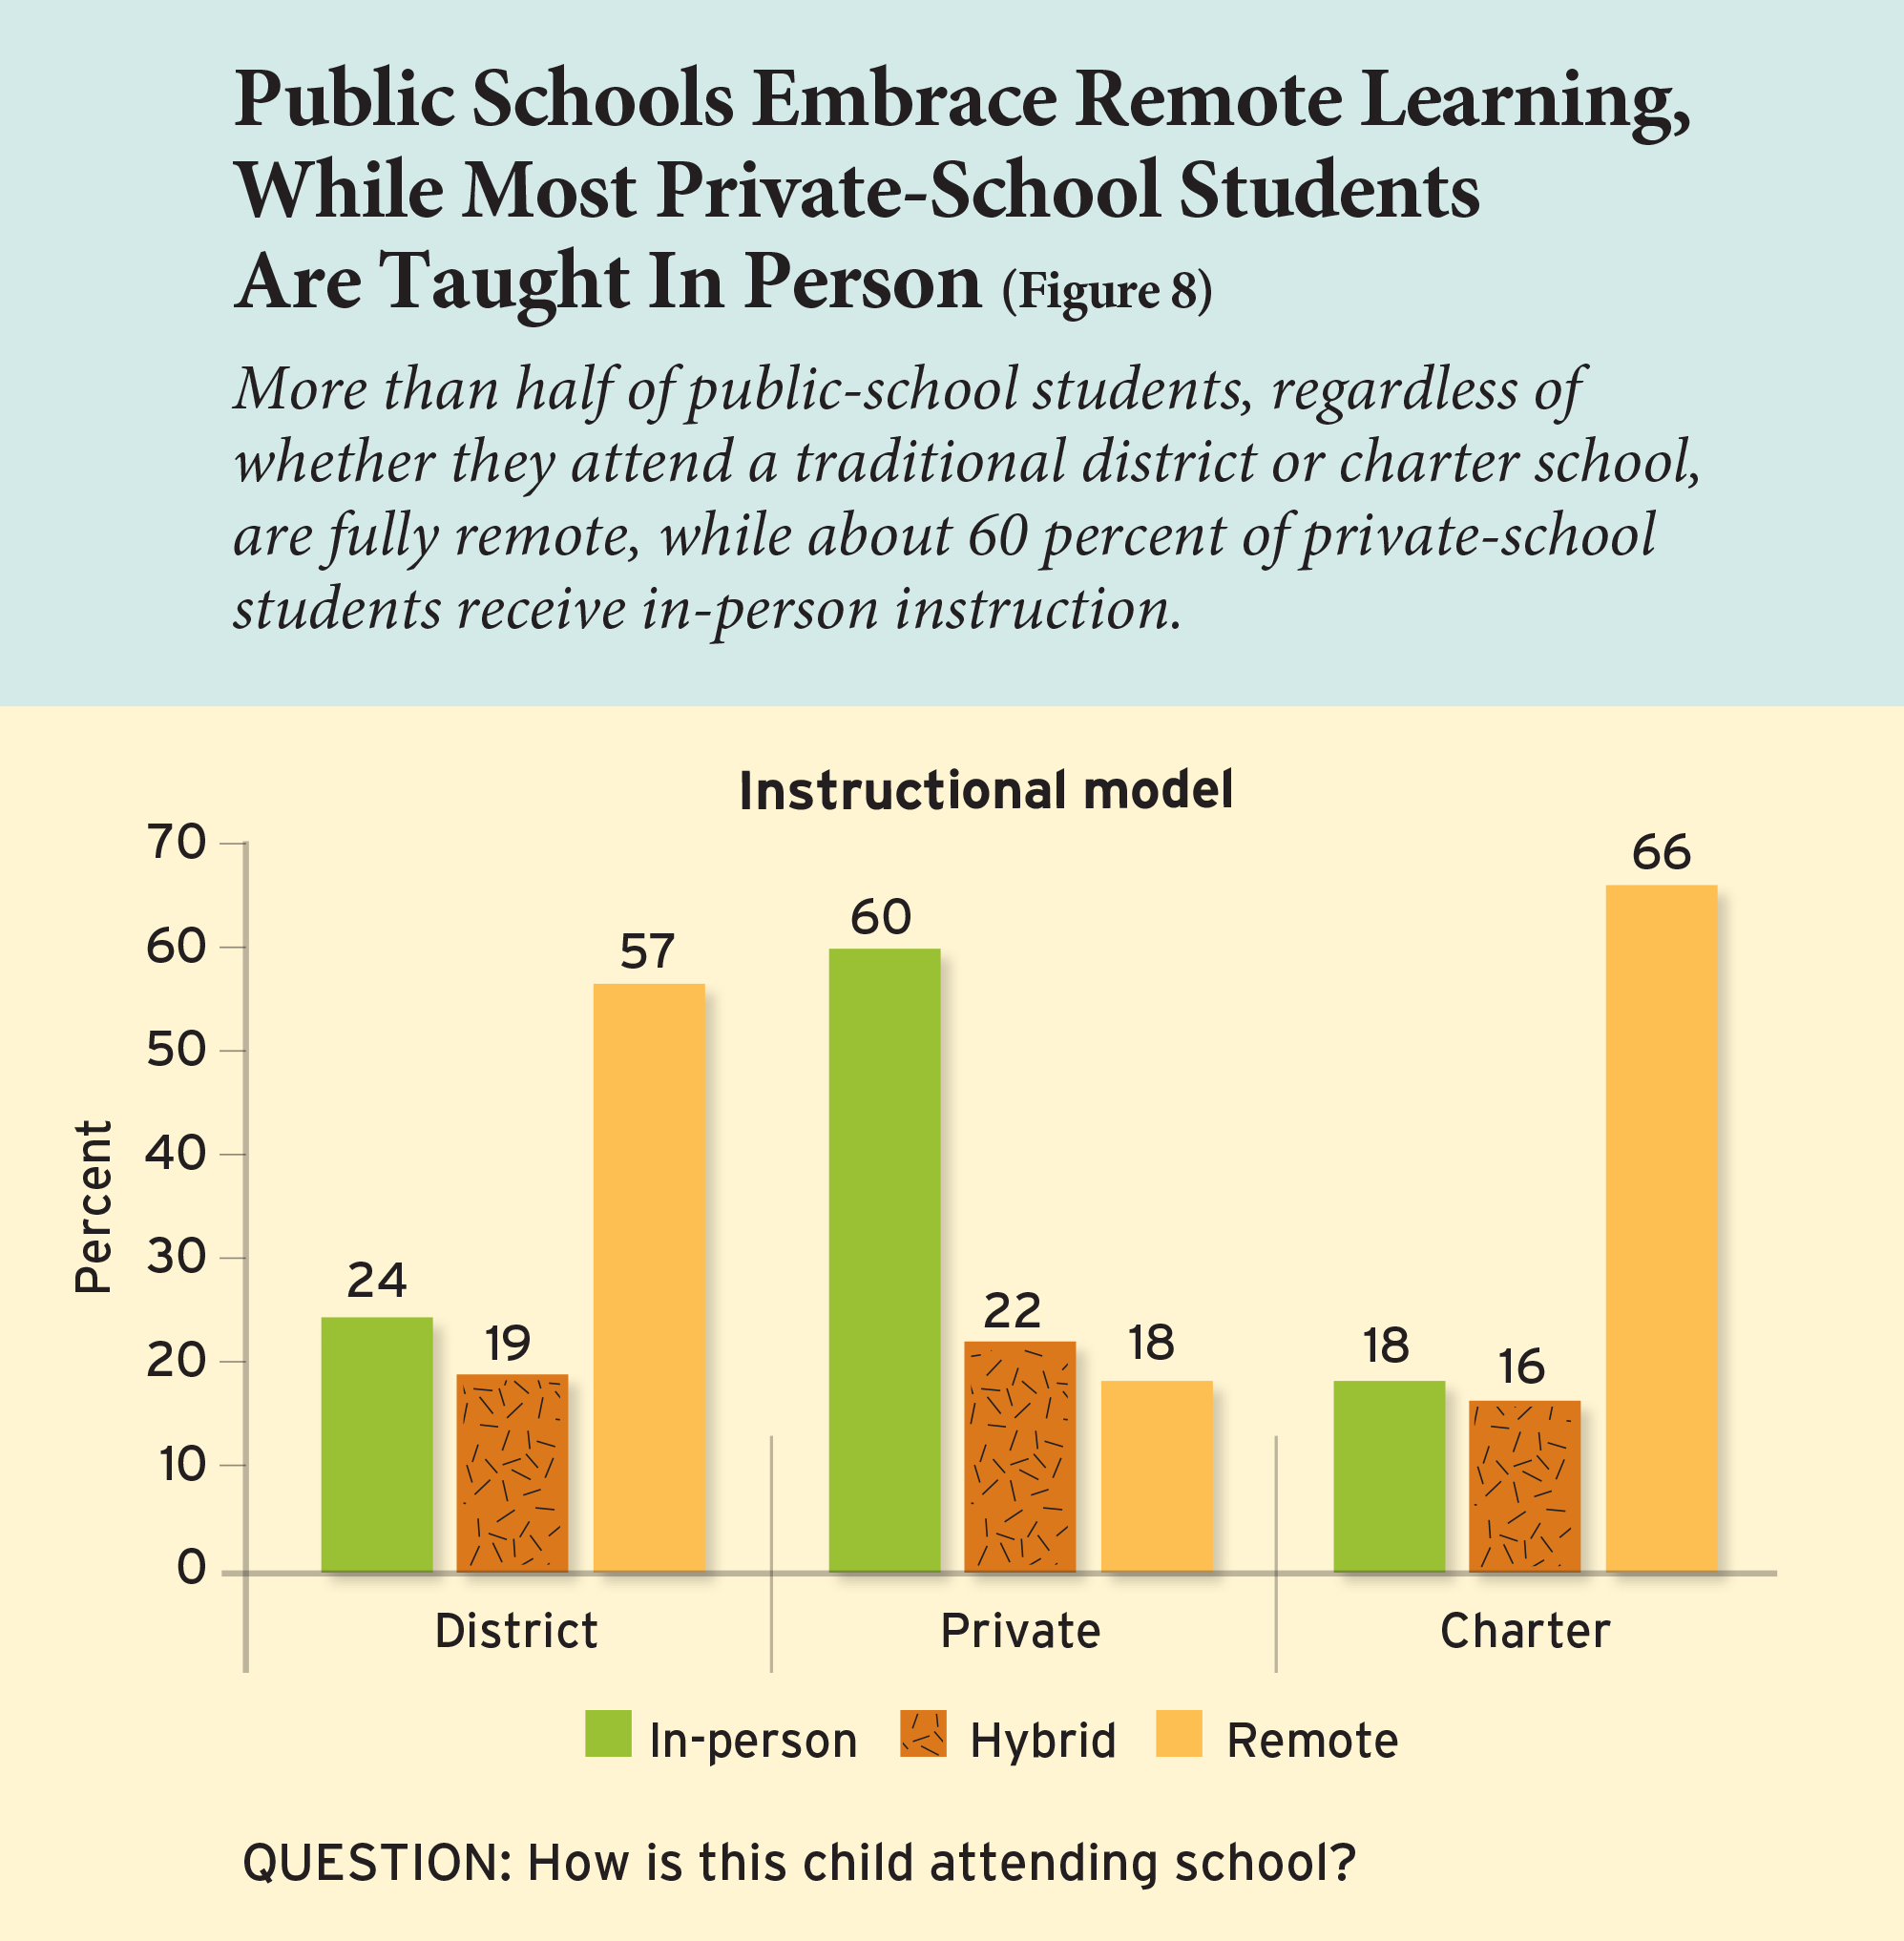 Public Schools Embrace Remote Learning, While Most Private-School Students Are Taught In Person (Figure 8)